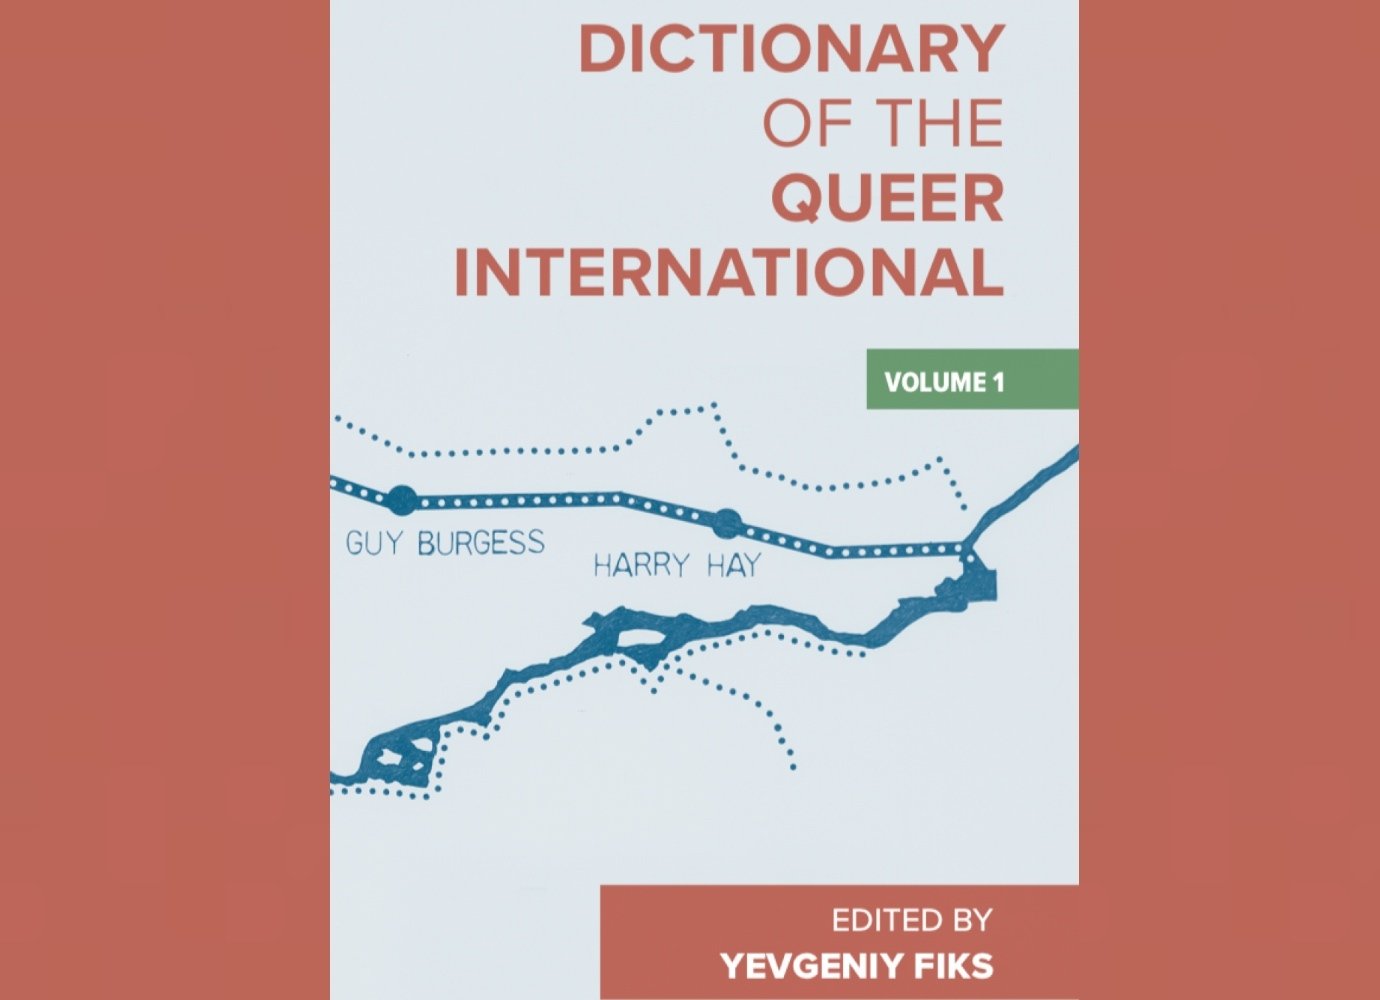 Dictionary of the Queer International: Yevgeniy Fiks launches book of queer phrases from around the world 